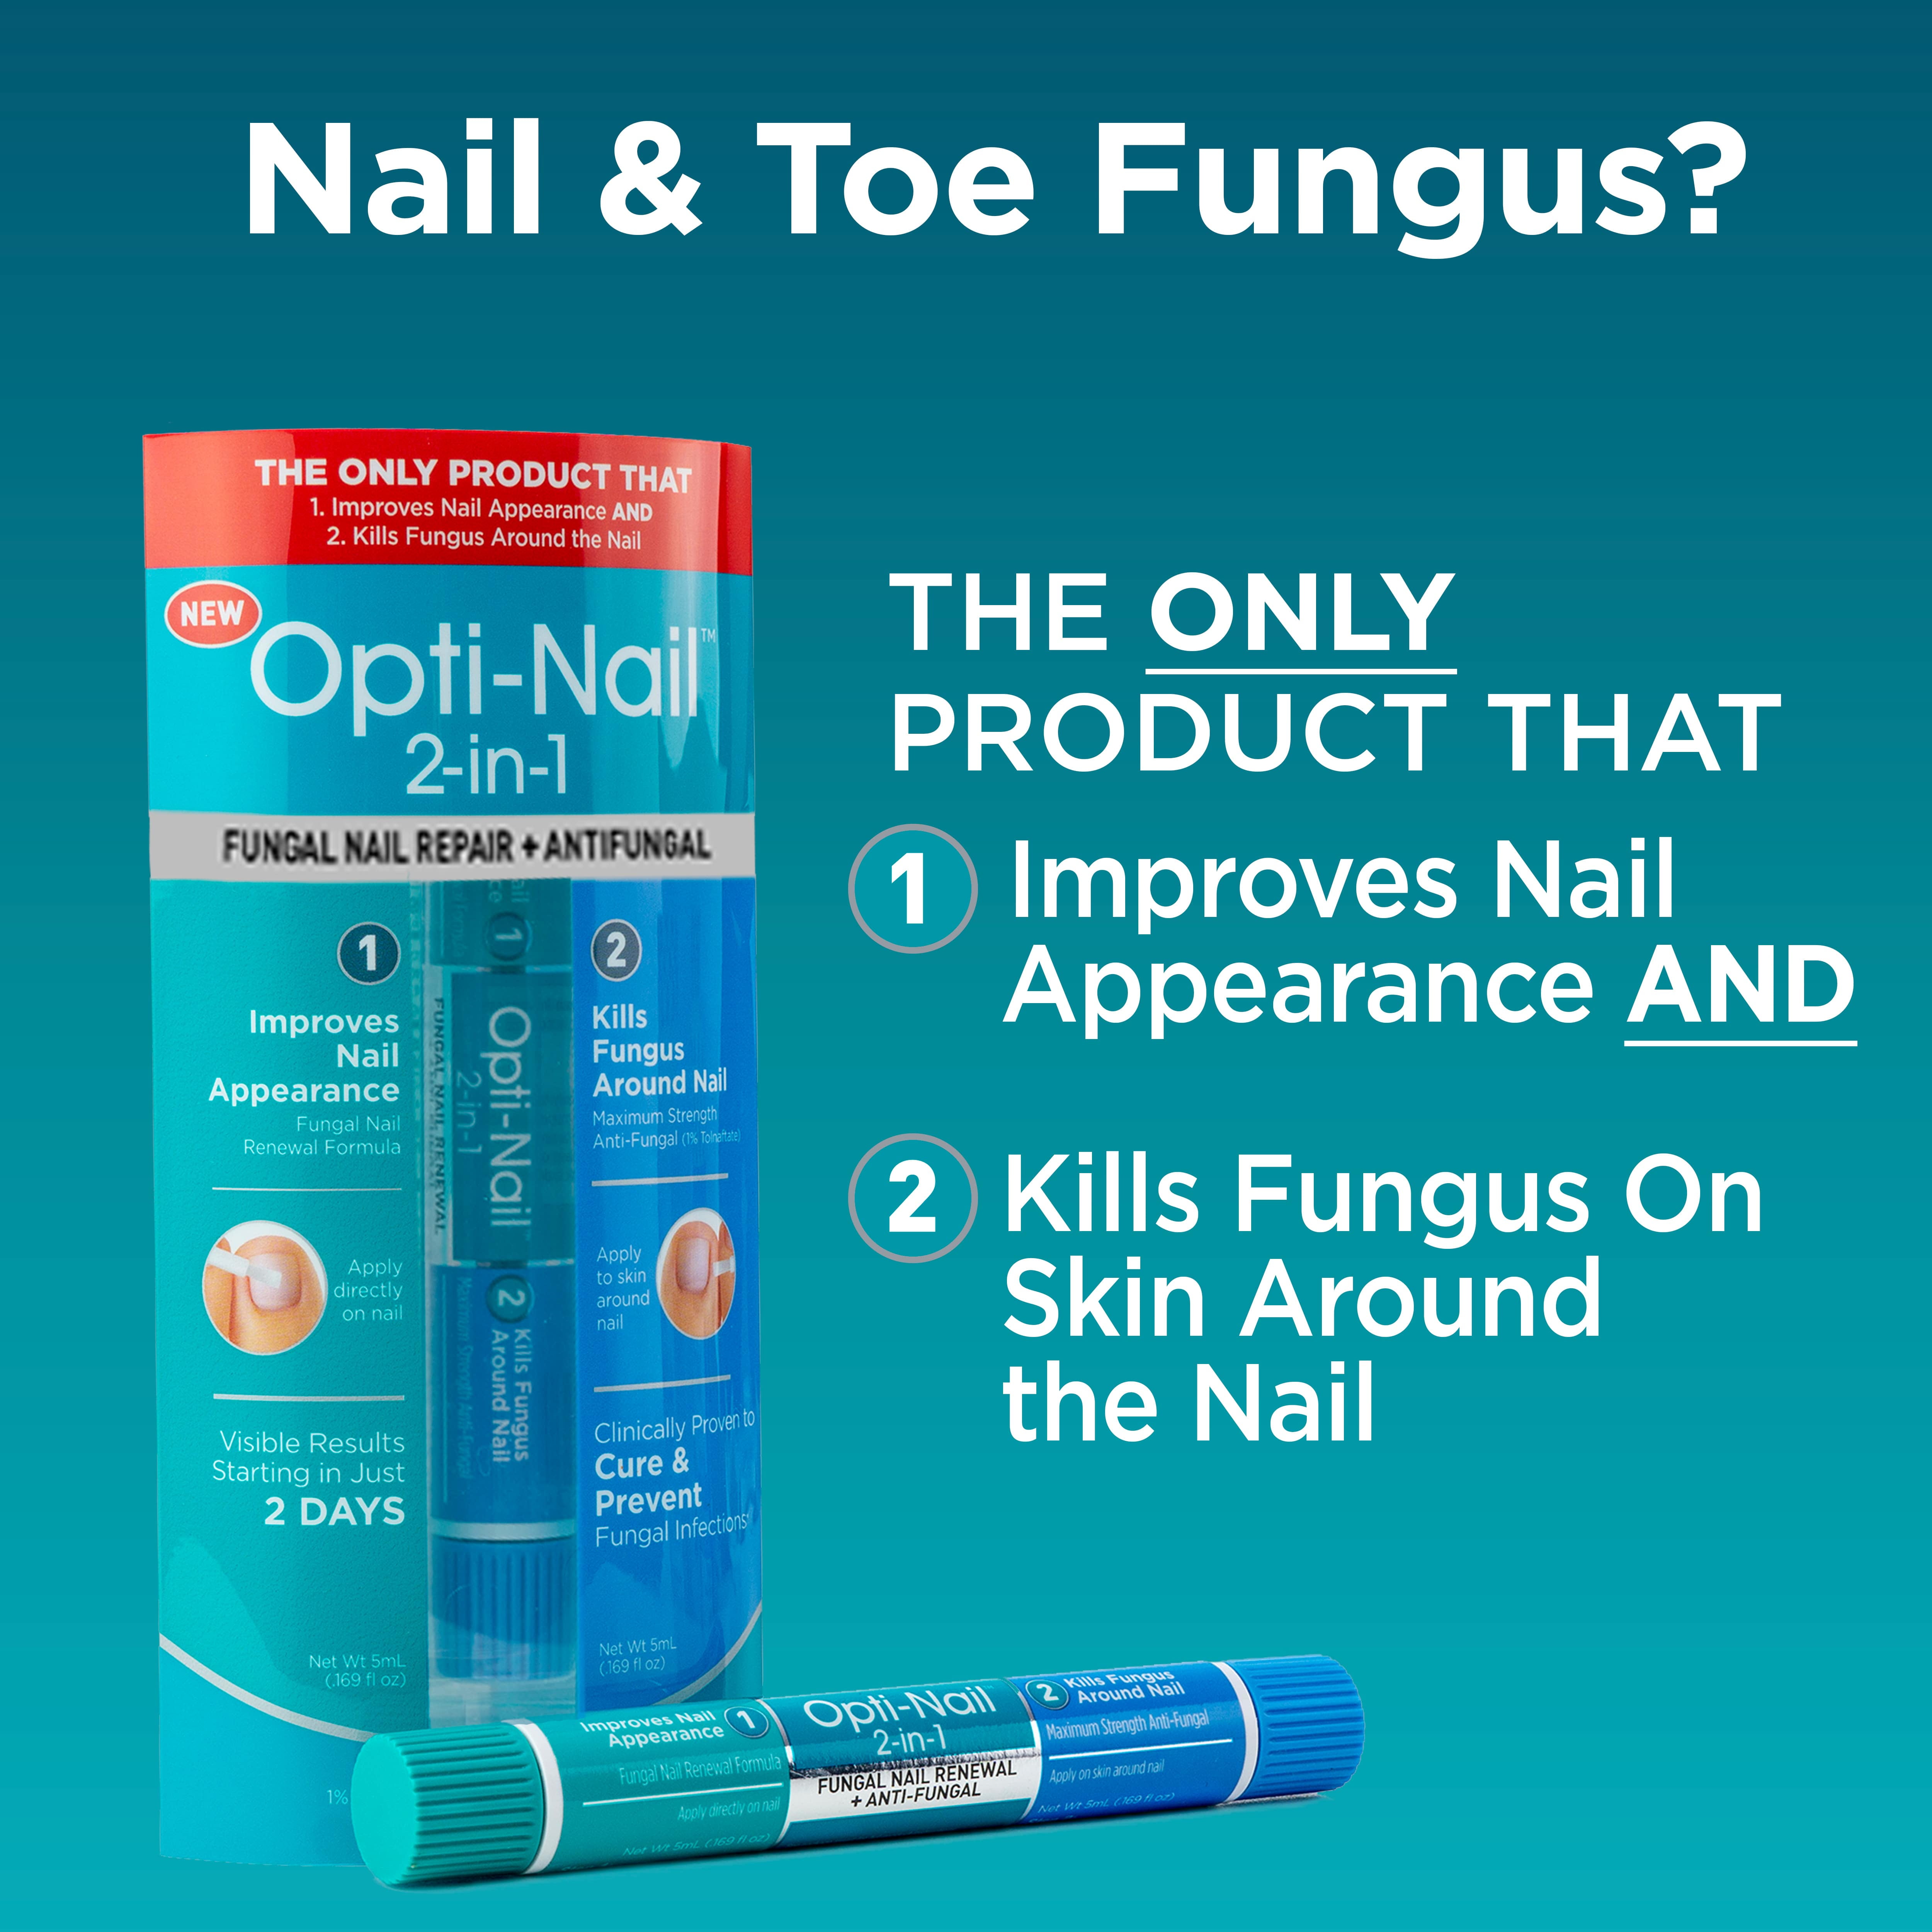 Why You Shouldn't Use Bleach for Toenail Fungus